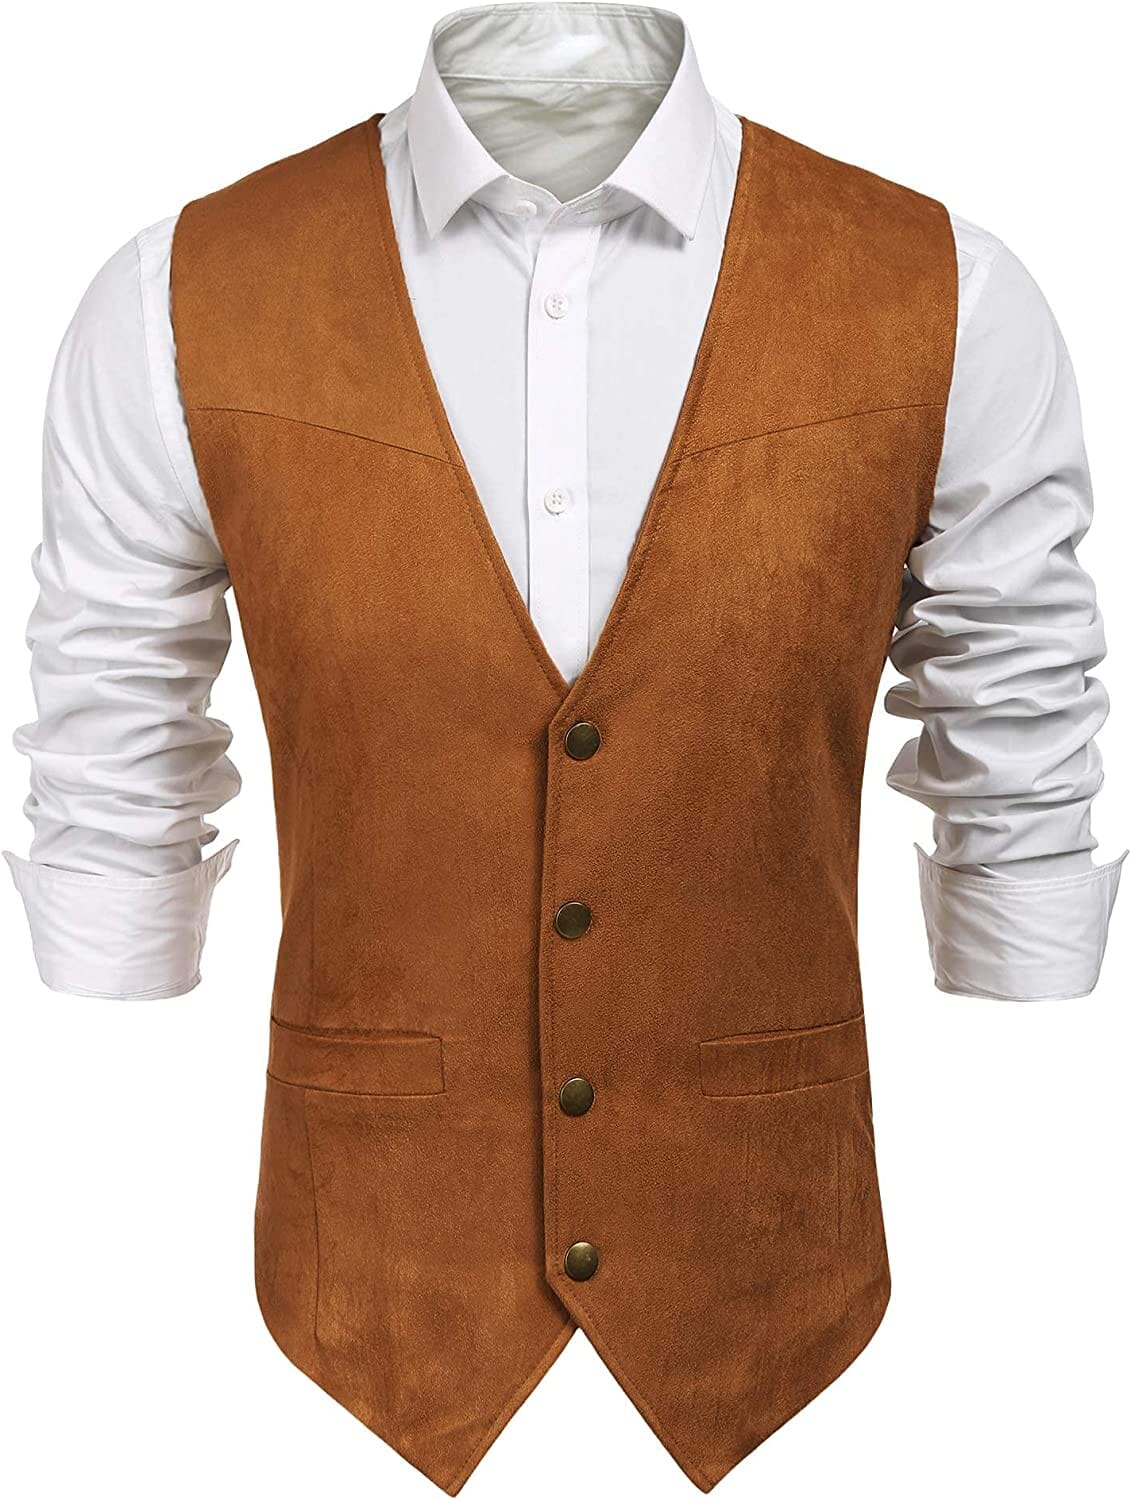 Solid Suede Leather Suit Vest (US Only) Vest COOFANDY Store Brown S 